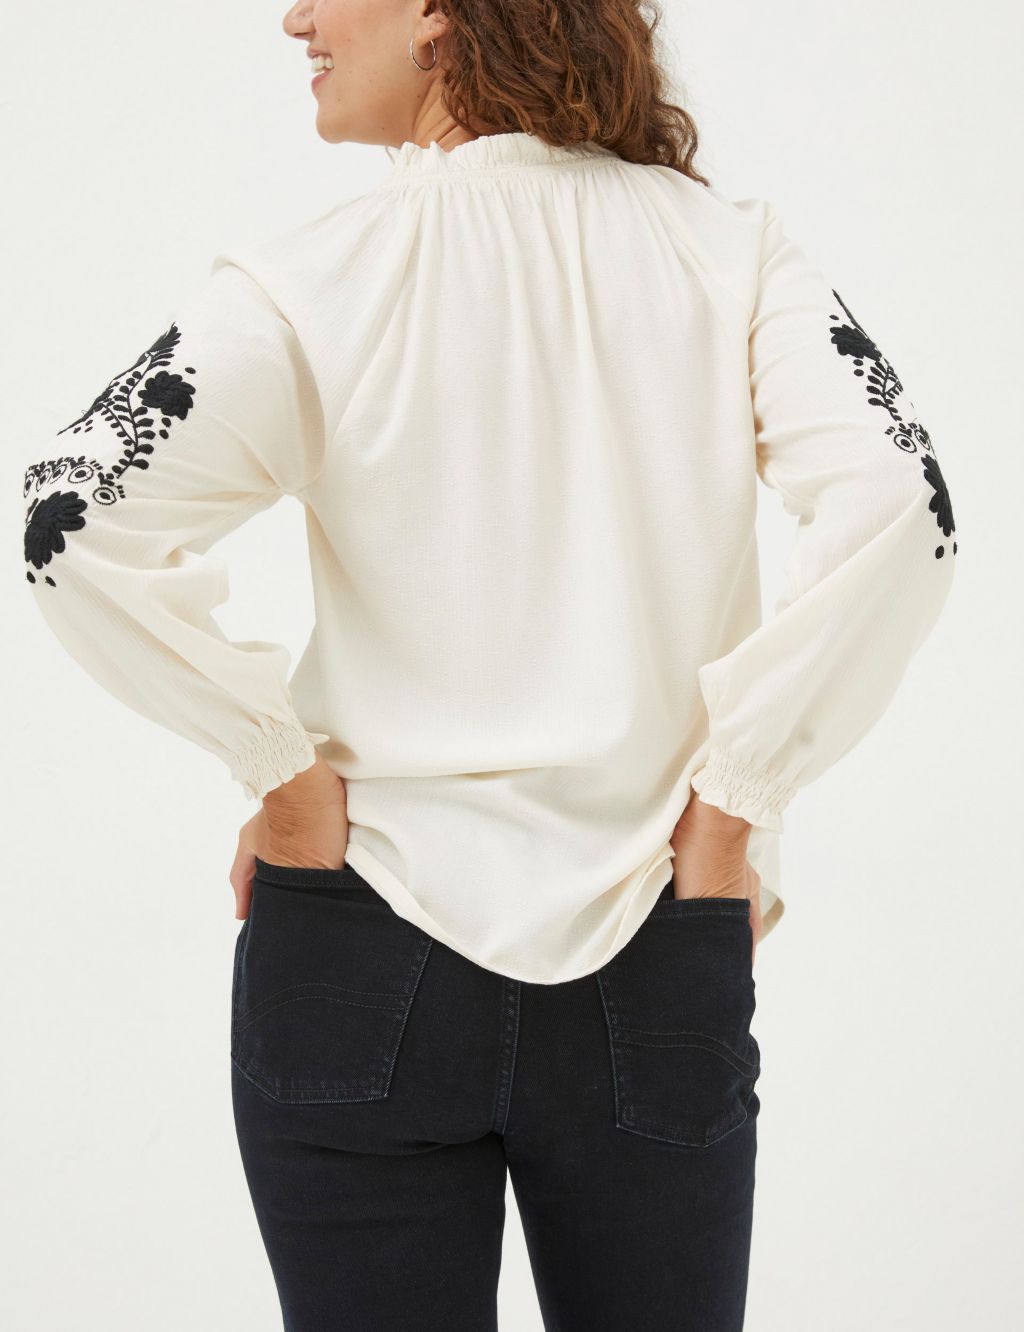 Floral Embroidered Notch Neck Blouse image 3